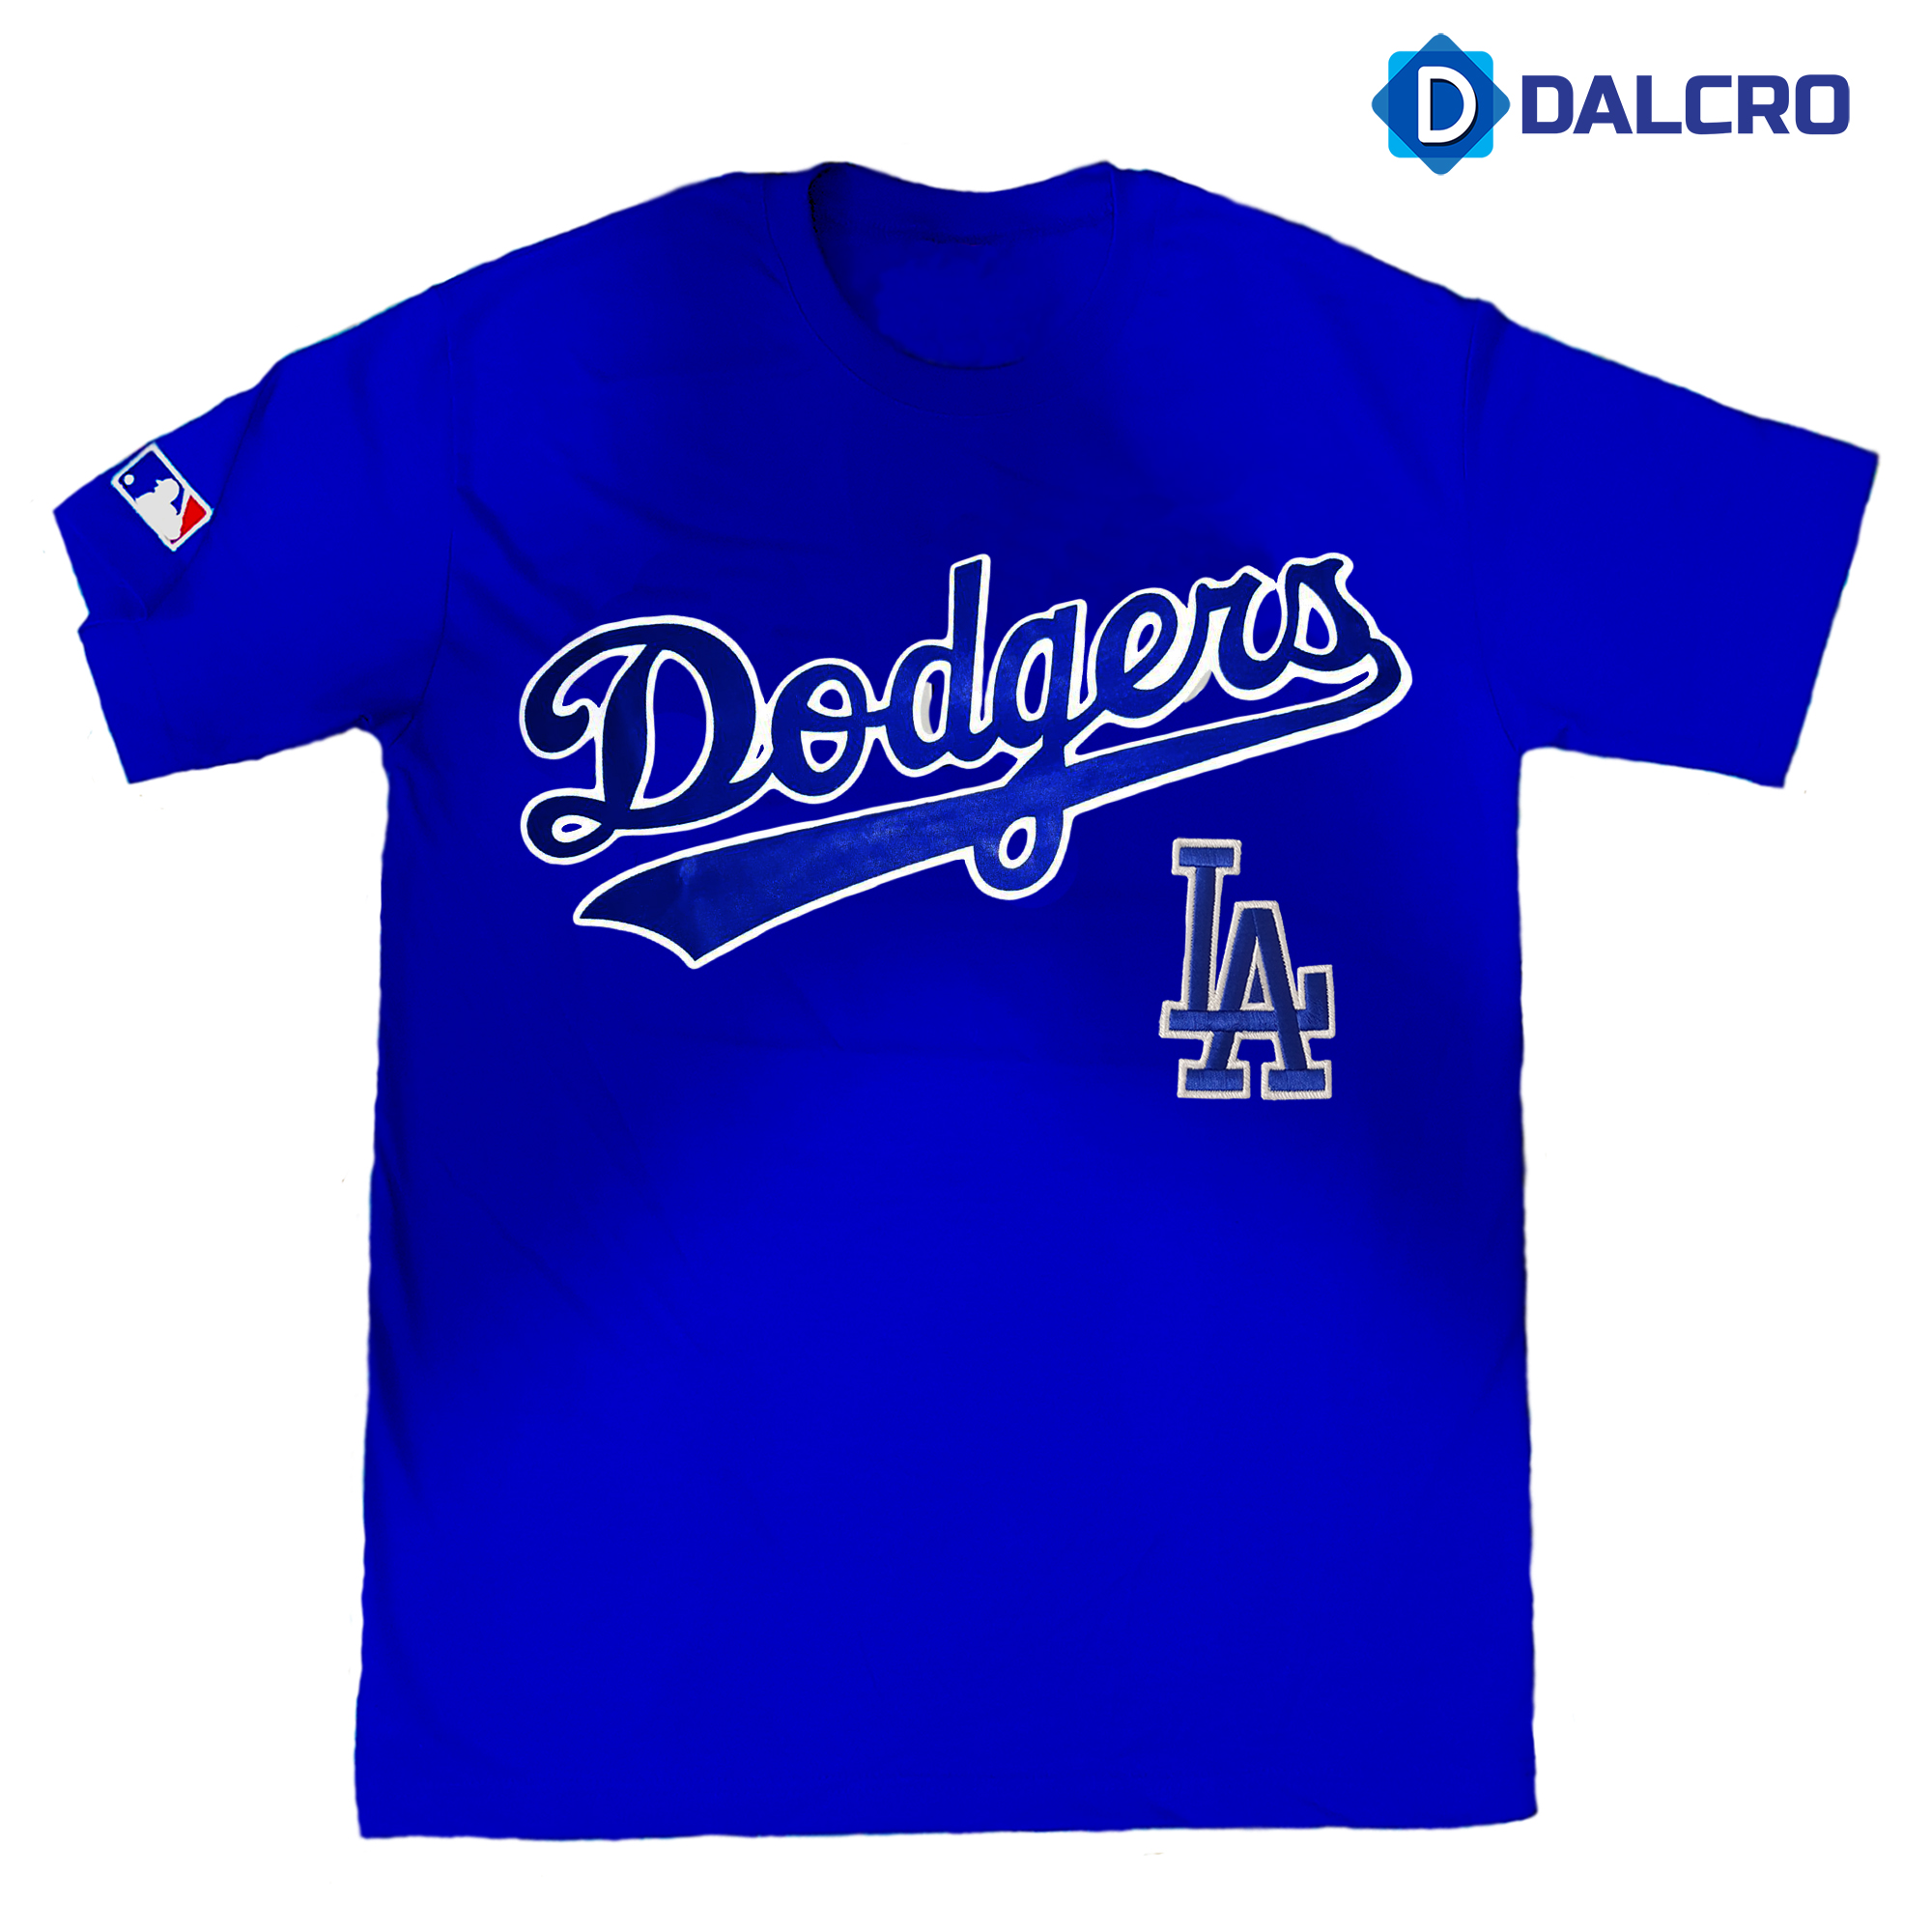 MLB LA Dodgers Men's T-shirt with Embroidery, Rubberized Screen Print  Design tshirt for men, Shirt Tees, Good Quality T-Shirt Sale (Royal Blue)